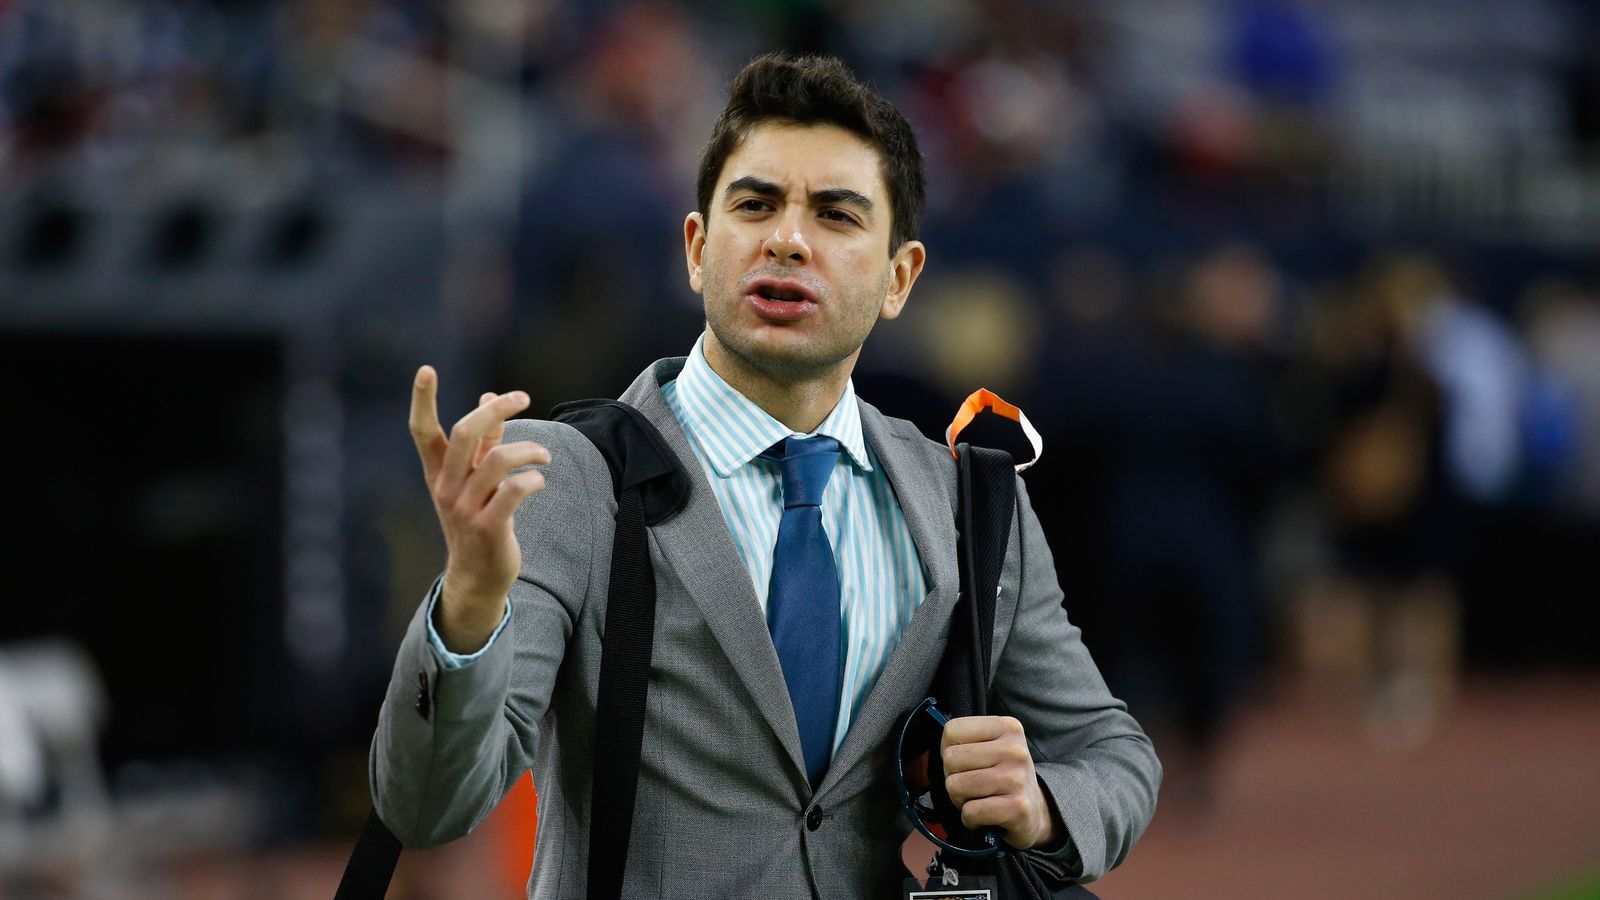 Fulham FC vice-chairman Tony Khan tells fan to 'go to hell' after Burnley defeat | UK ...1600 x 900